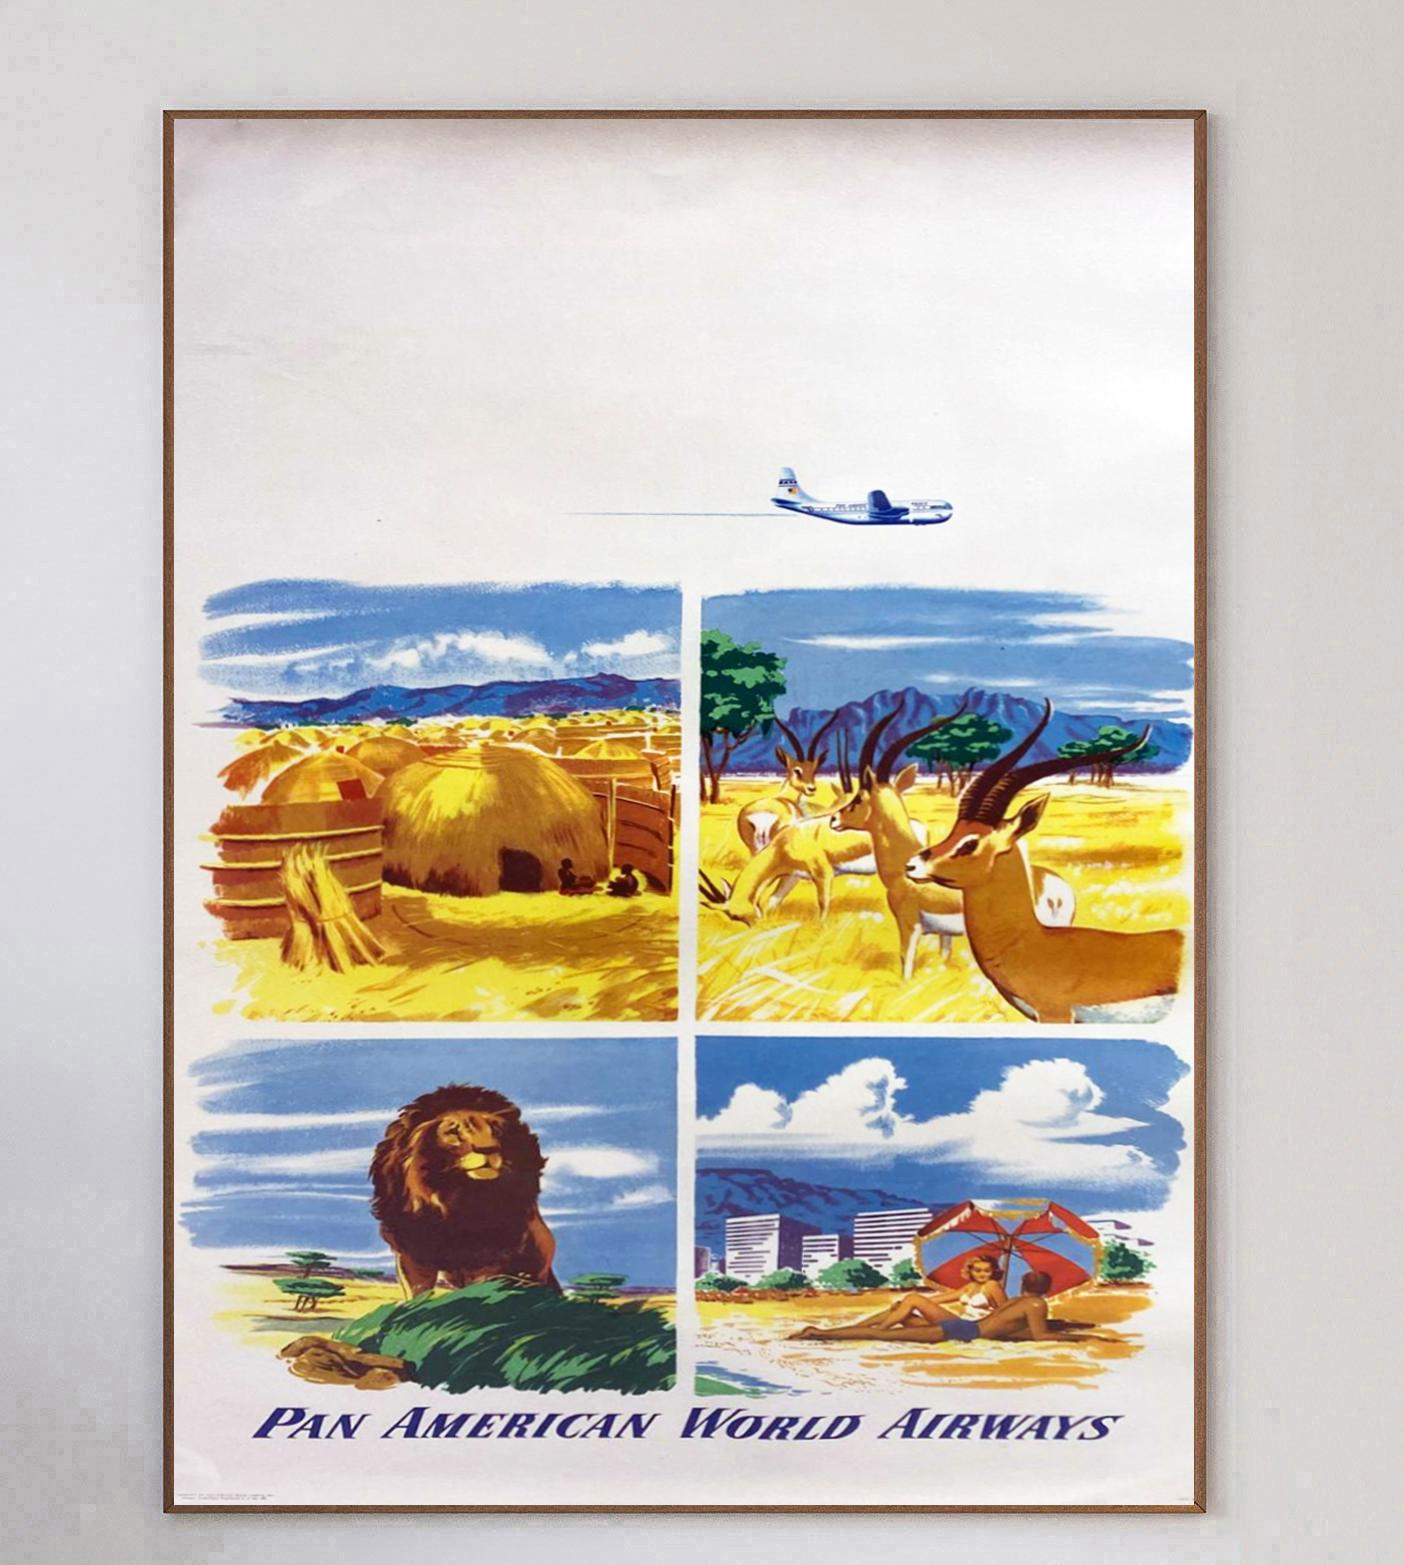 1951 Pan American World Airways Original Vintage Poster In Good Condition For Sale In Winchester, GB